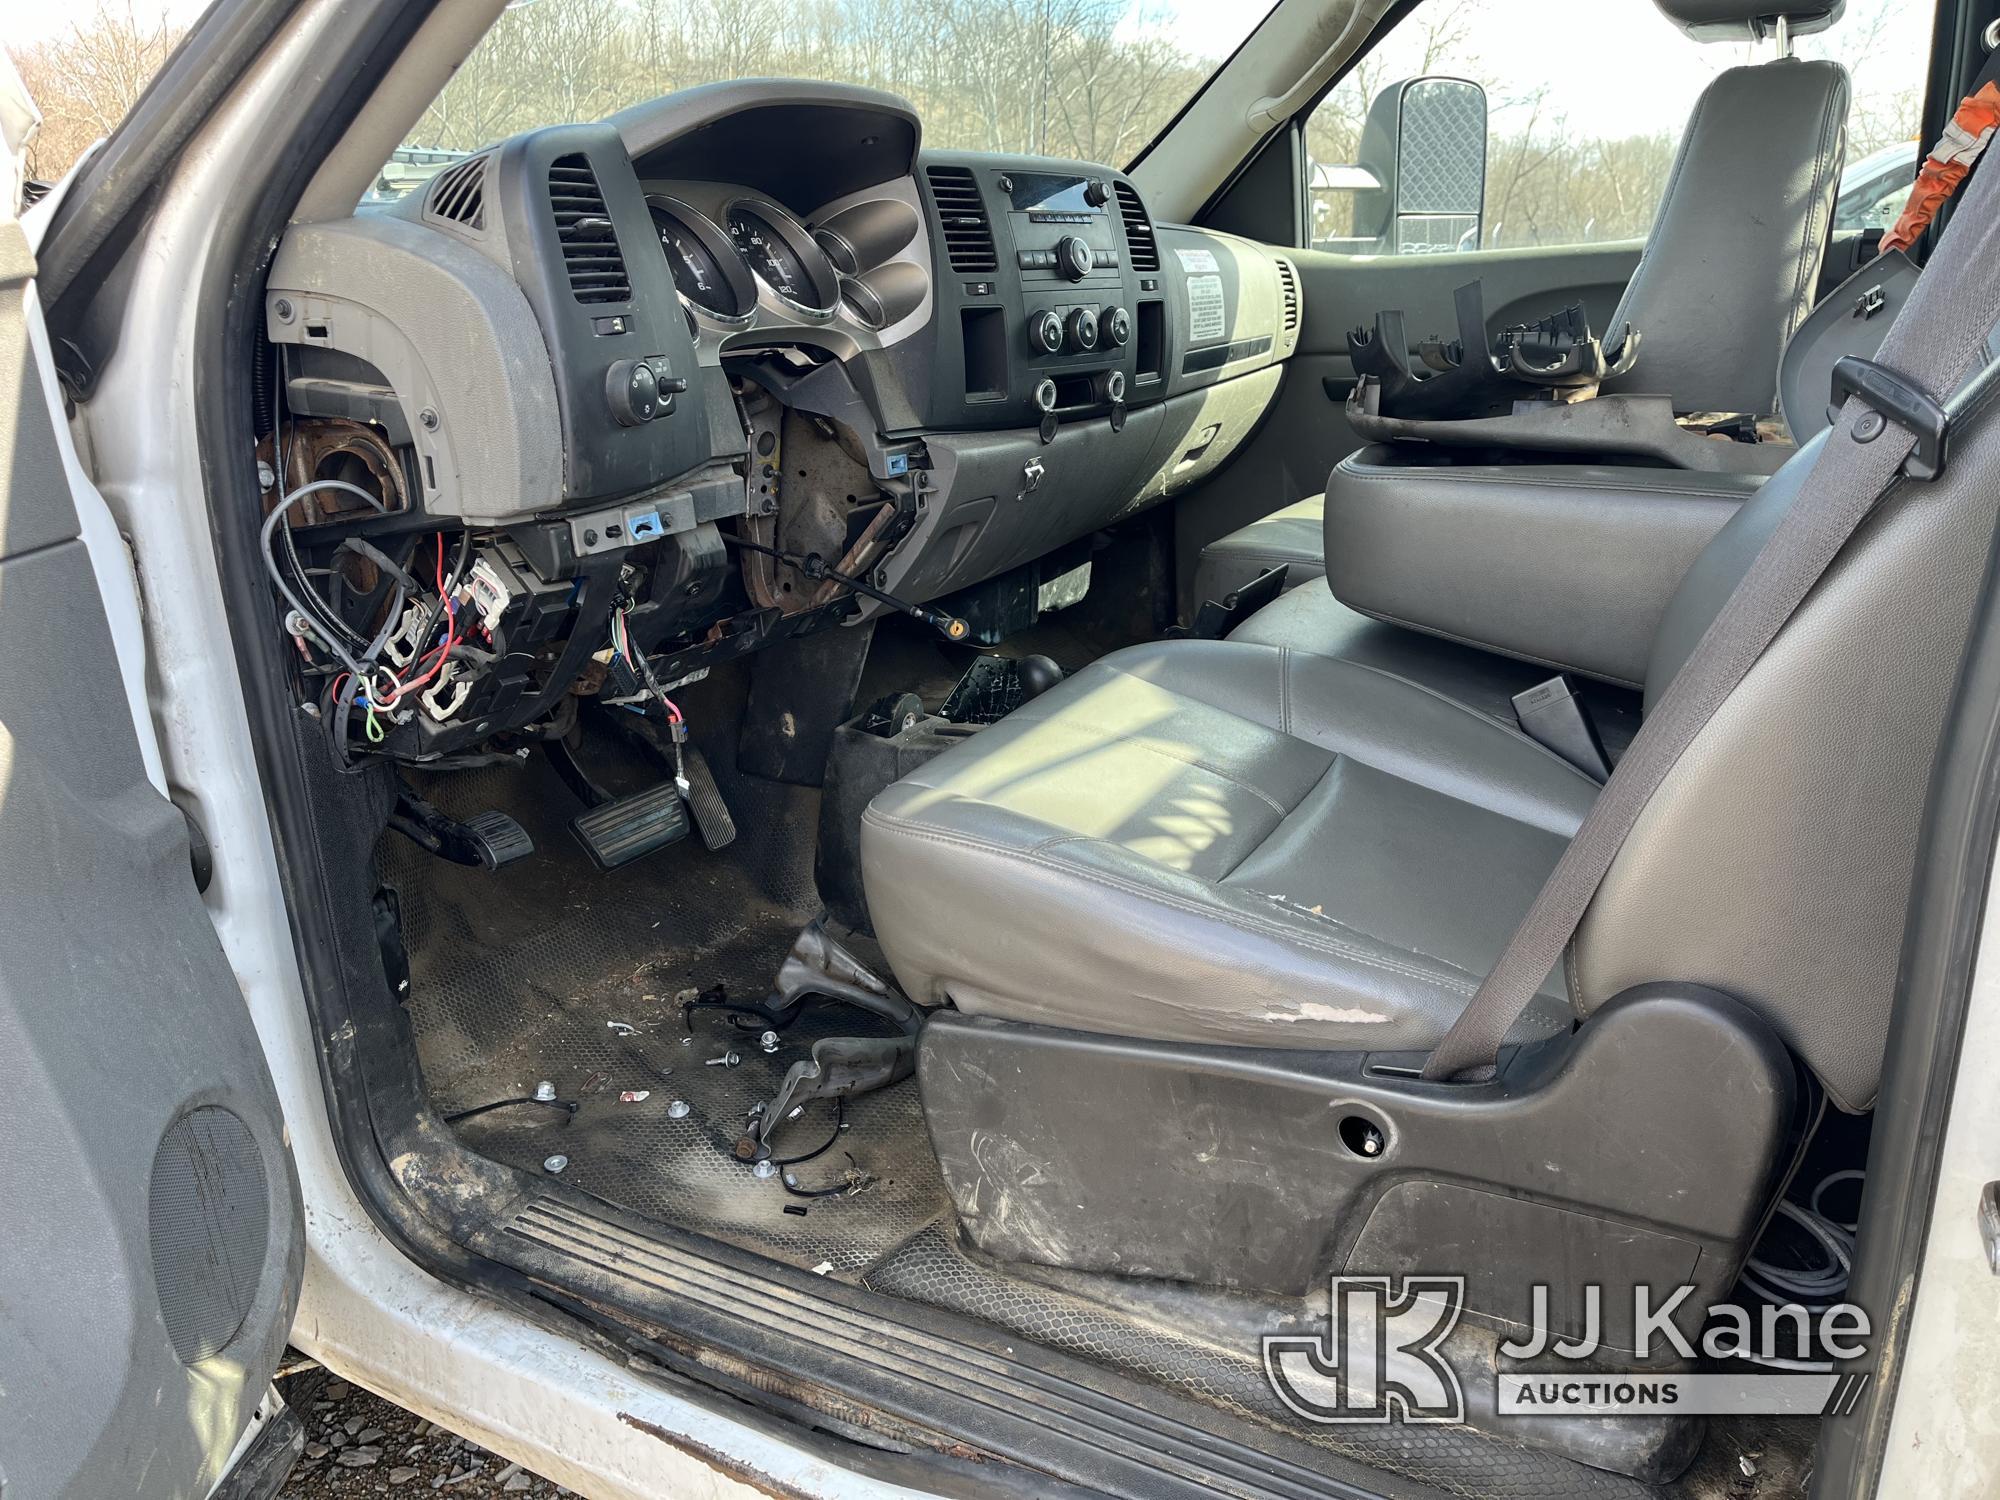 (Smock, PA) 2012 GMC Sierra 3500 4x4 Pickup Truck Not Running, Condition Unknown, Missing Parts, Wre